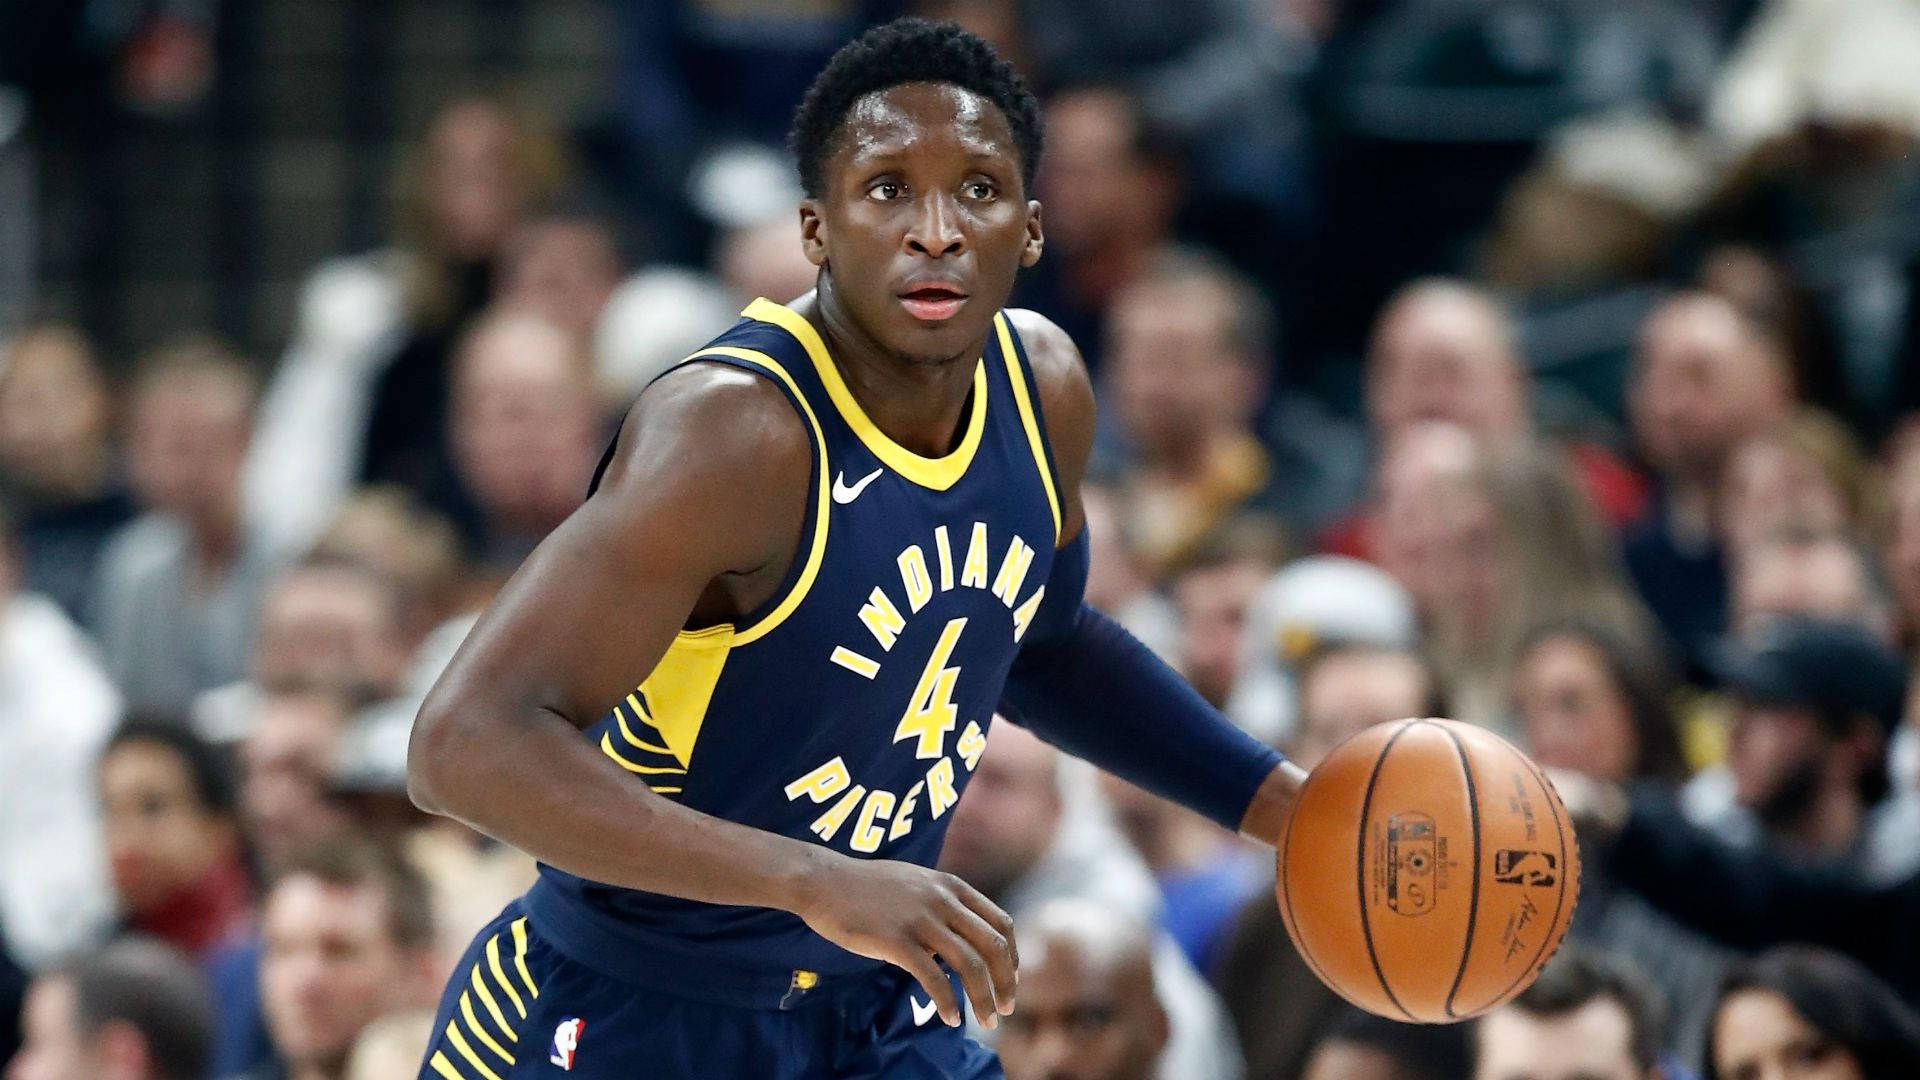 Victor Oladipo In-game Snapshot Background